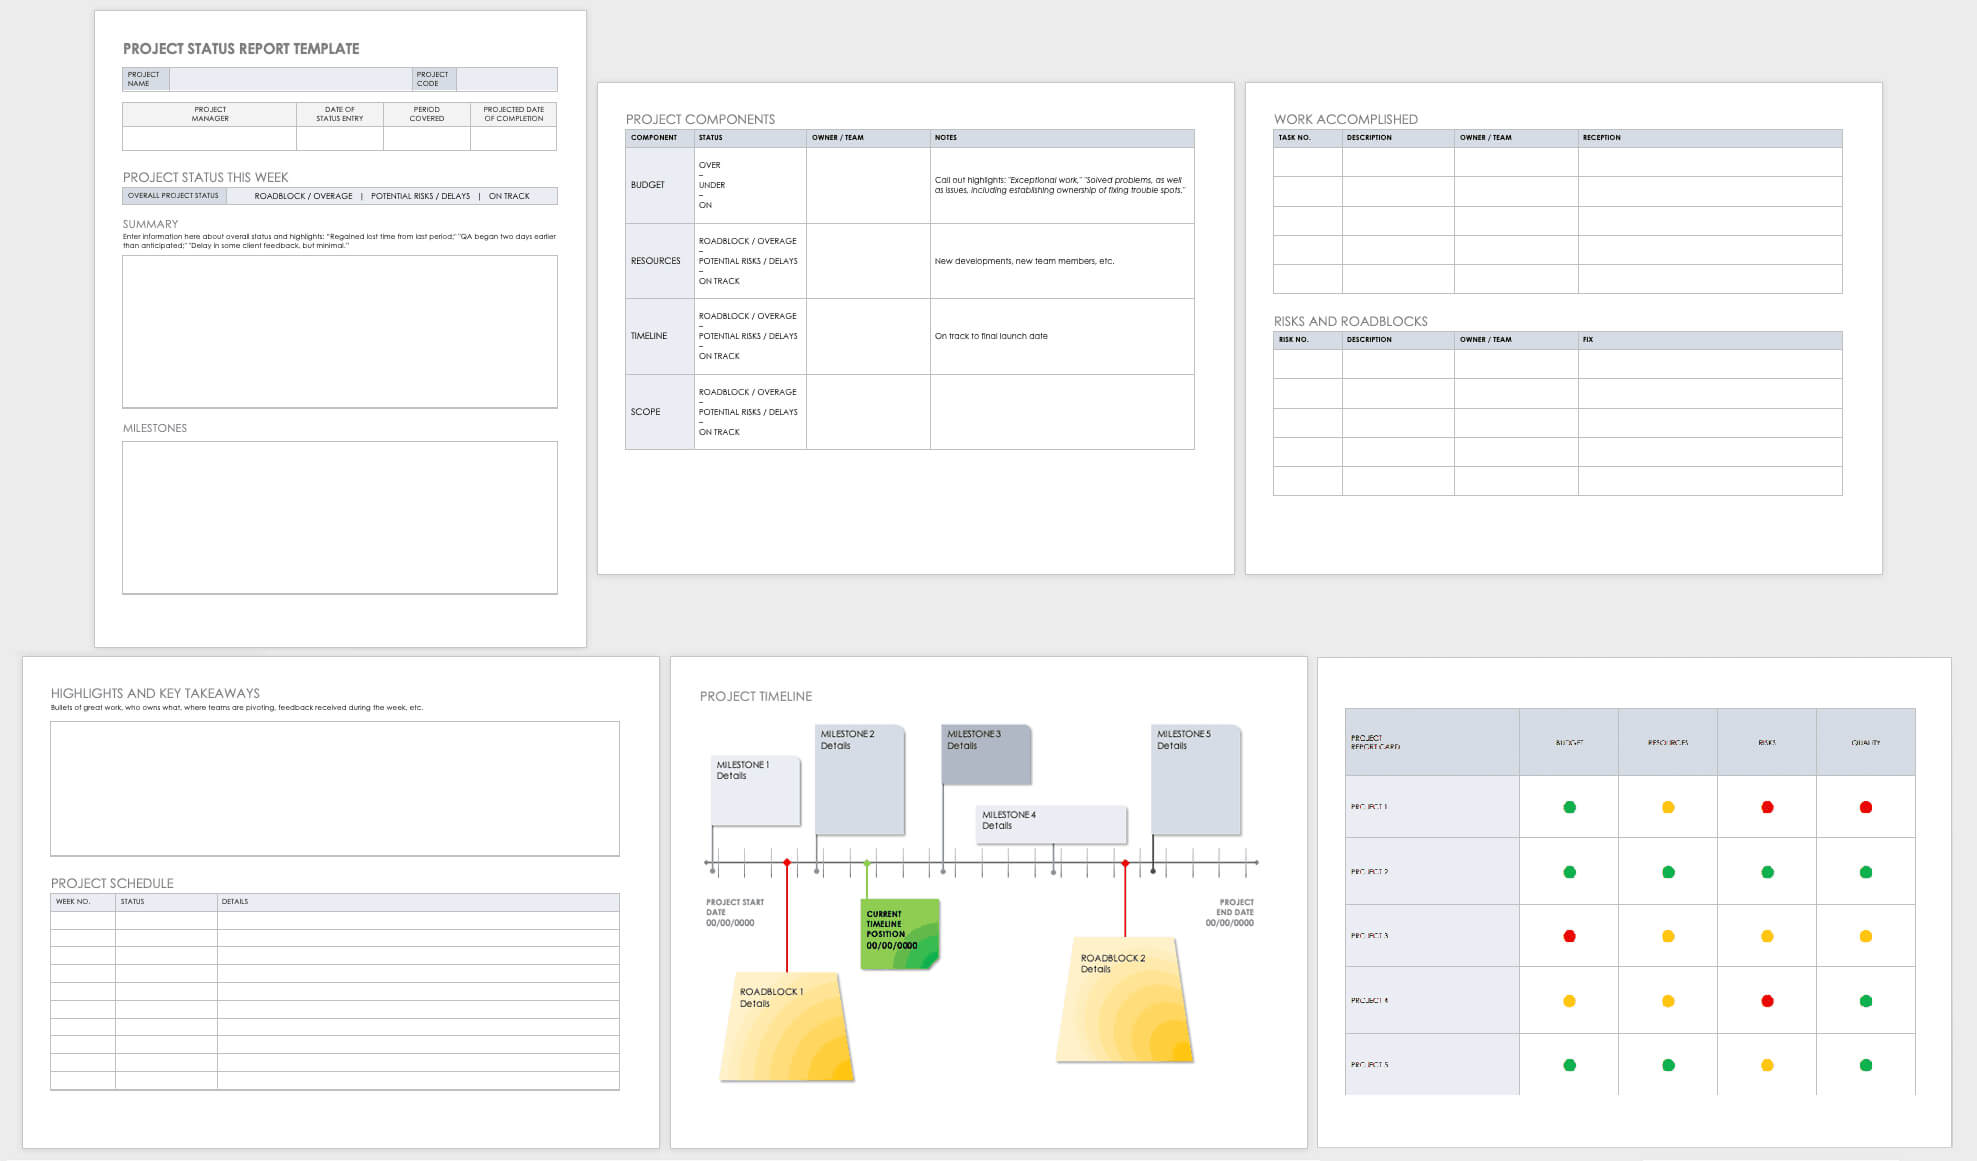 Free Project Report Templates | Smartsheet With Project Weekly Status Report Template Excel